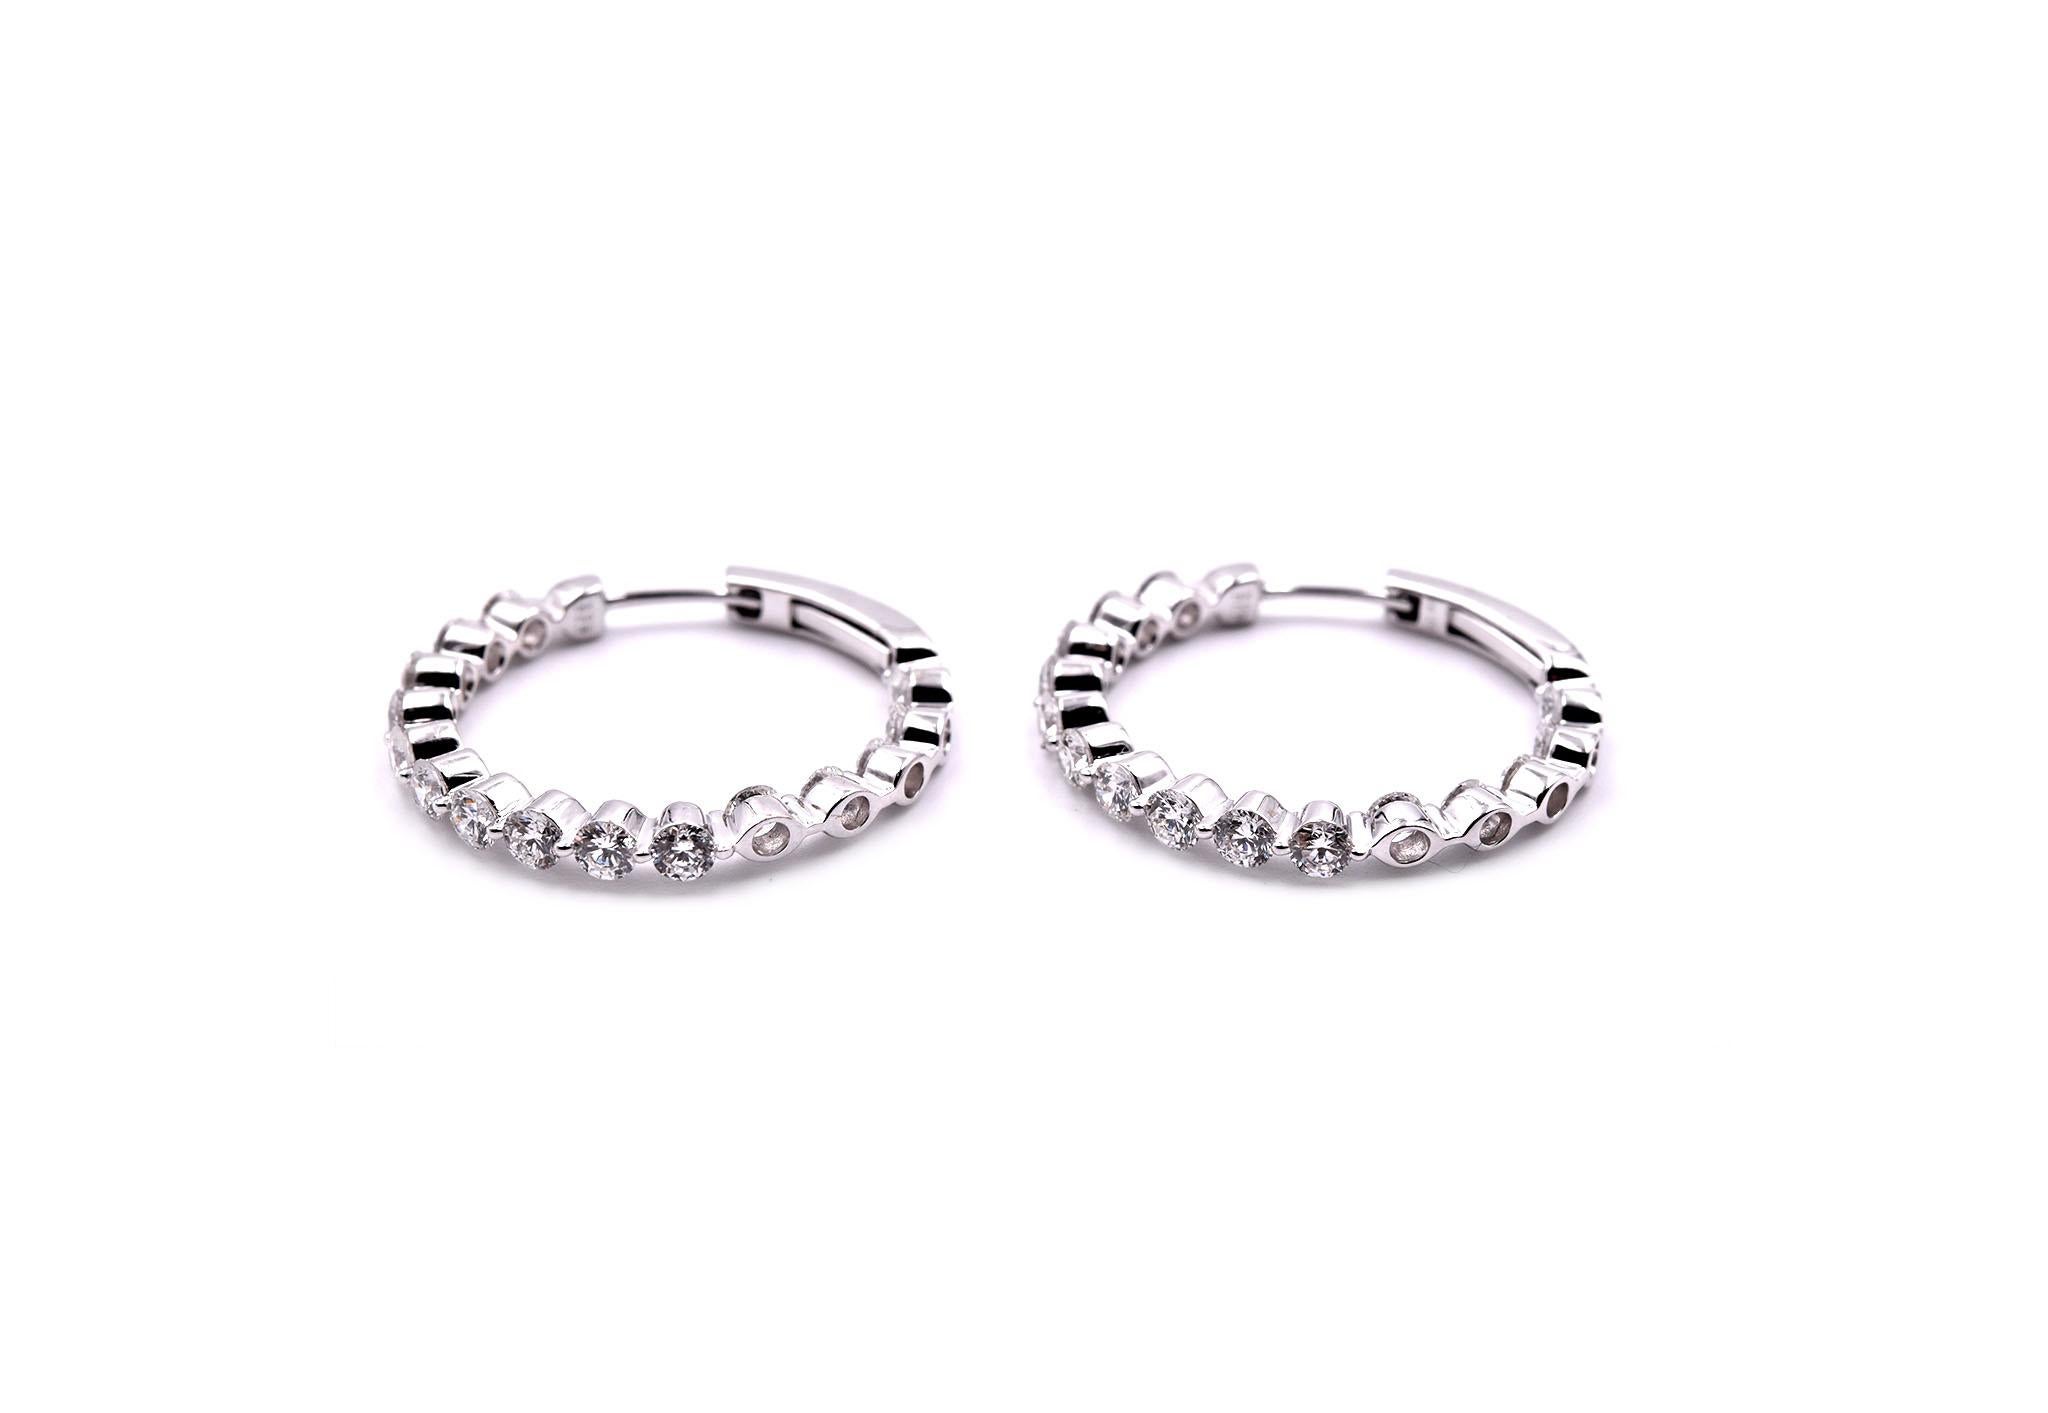 Designer: custom design
Material: 18k white
Diamonds: 30 round brilliant cut = 2.85cttw
Color: G
Clarity: VS
Dimensions: earrings are approximately 28mm in diameter 
Fastenings: hinged hoop 
Weight: 4.10grams